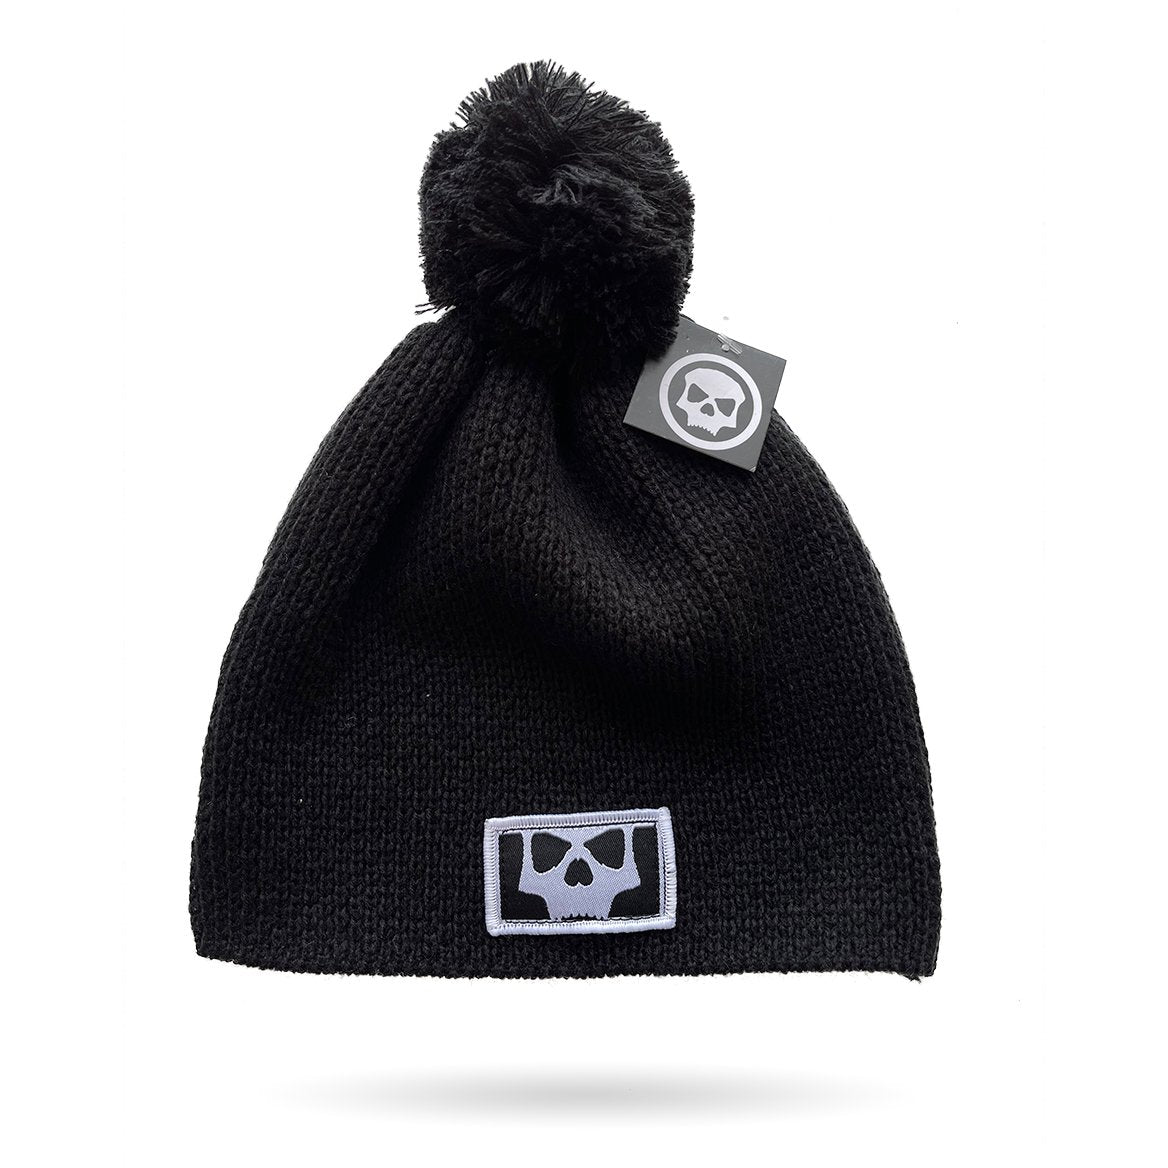 Infamous Knit Beanie -Skull Icon - Black